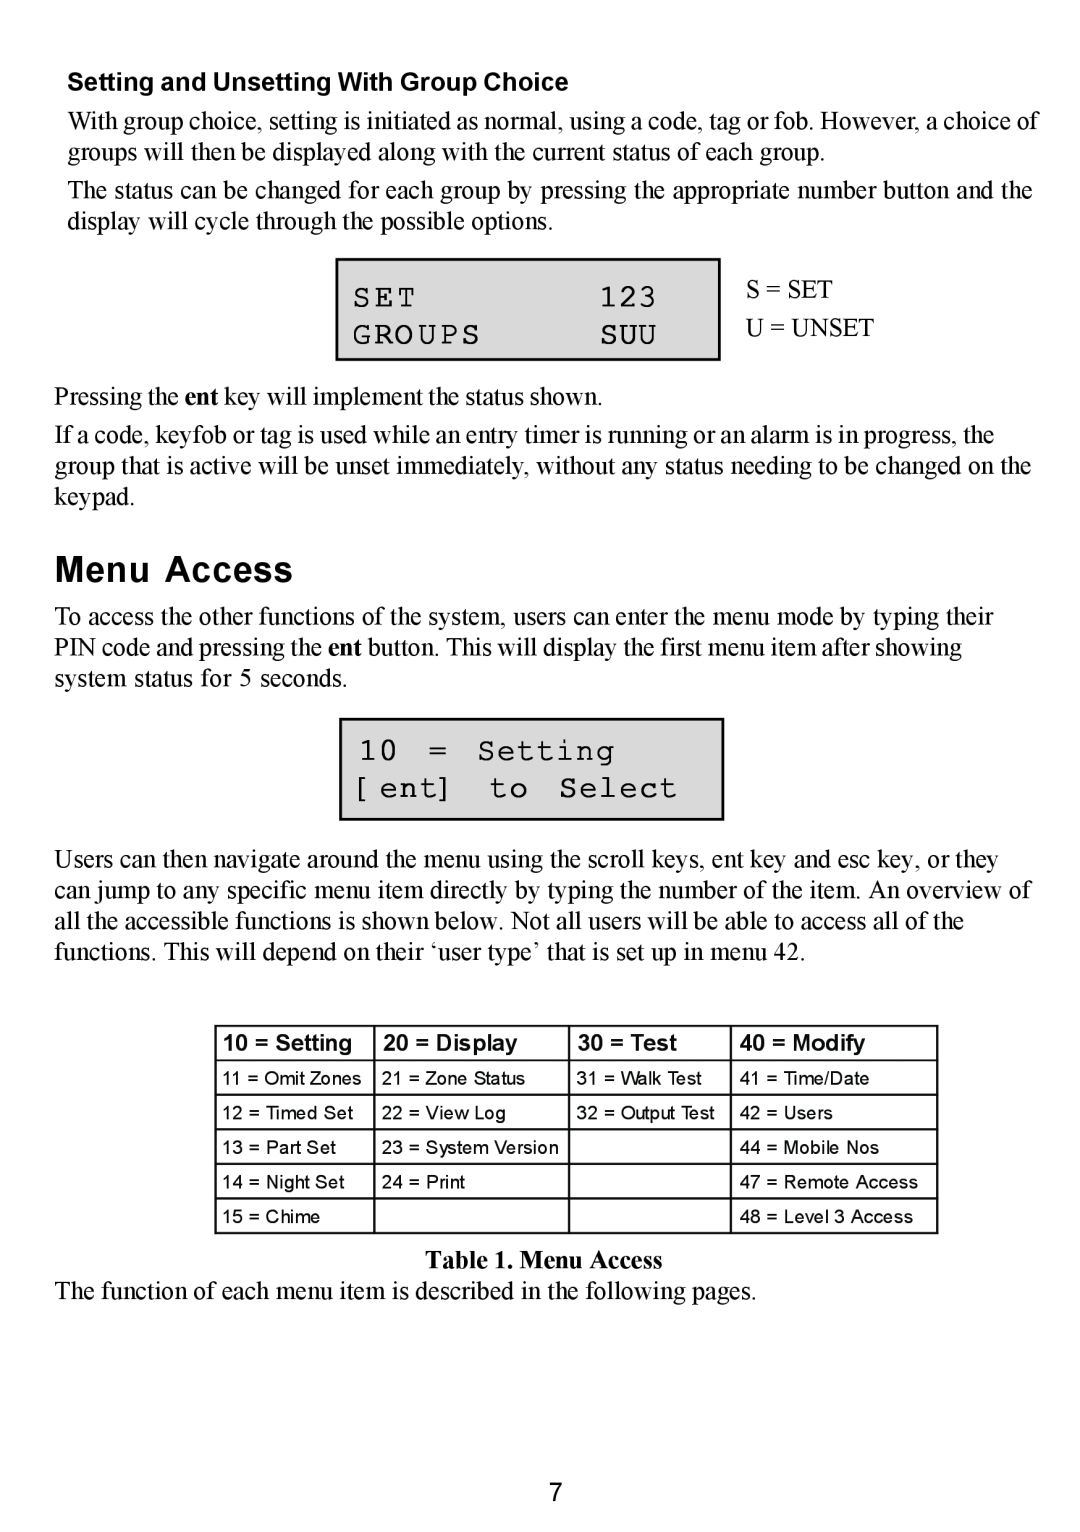 Honeywell 16103 manual Menu Access, Set Groups Suu, 10 = Setting ent to Select, Setting and Unsetting With Group Choice 